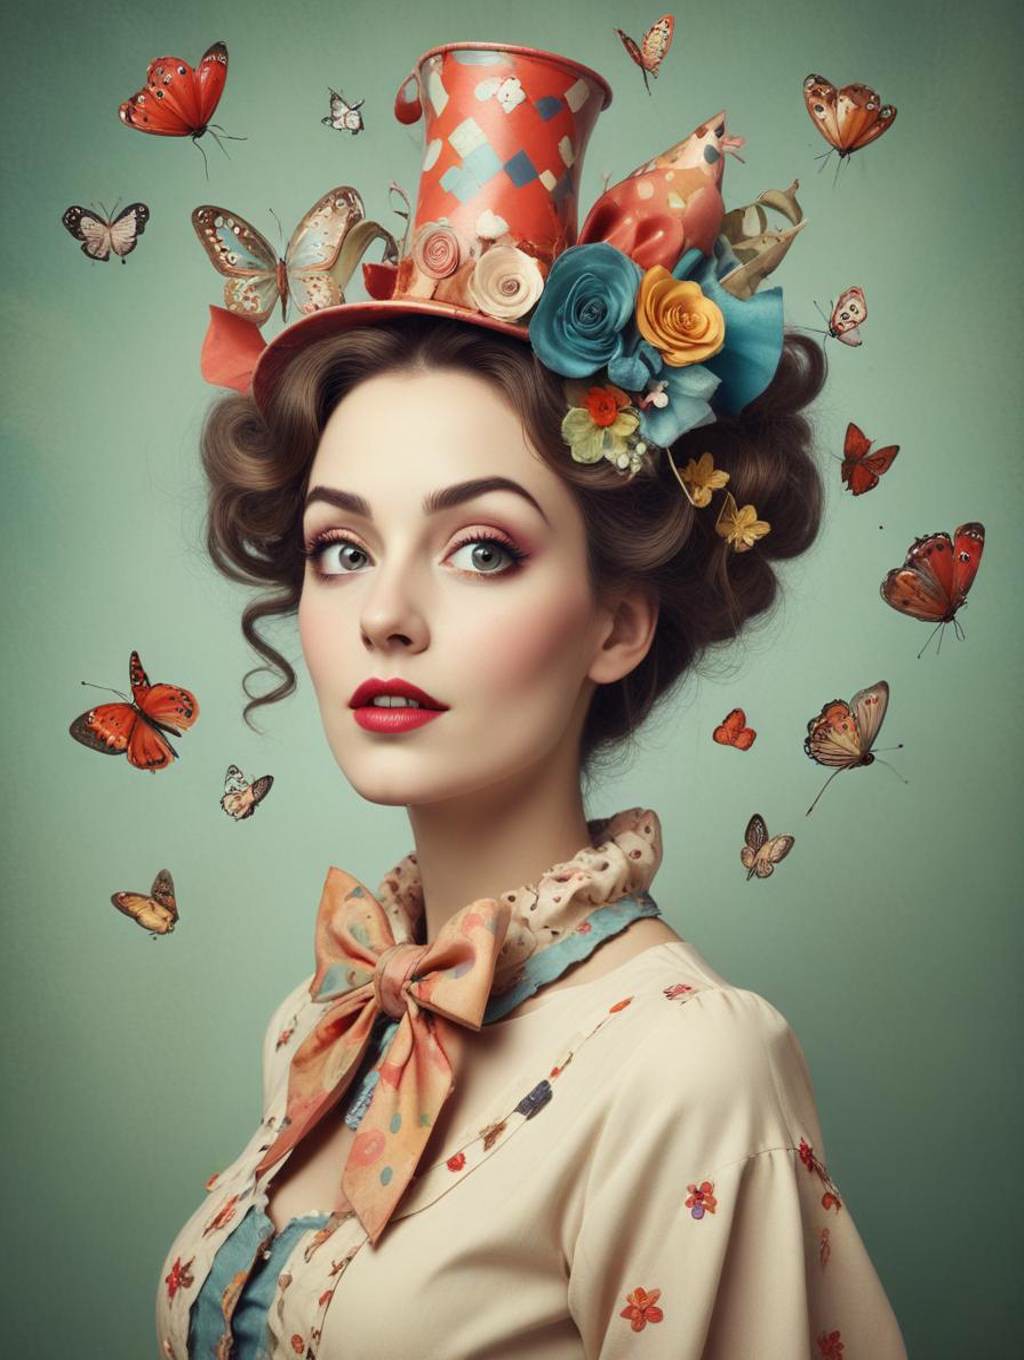 Whimsical & Quirky Women: Art Frames & Portrait Photography-Theme:5